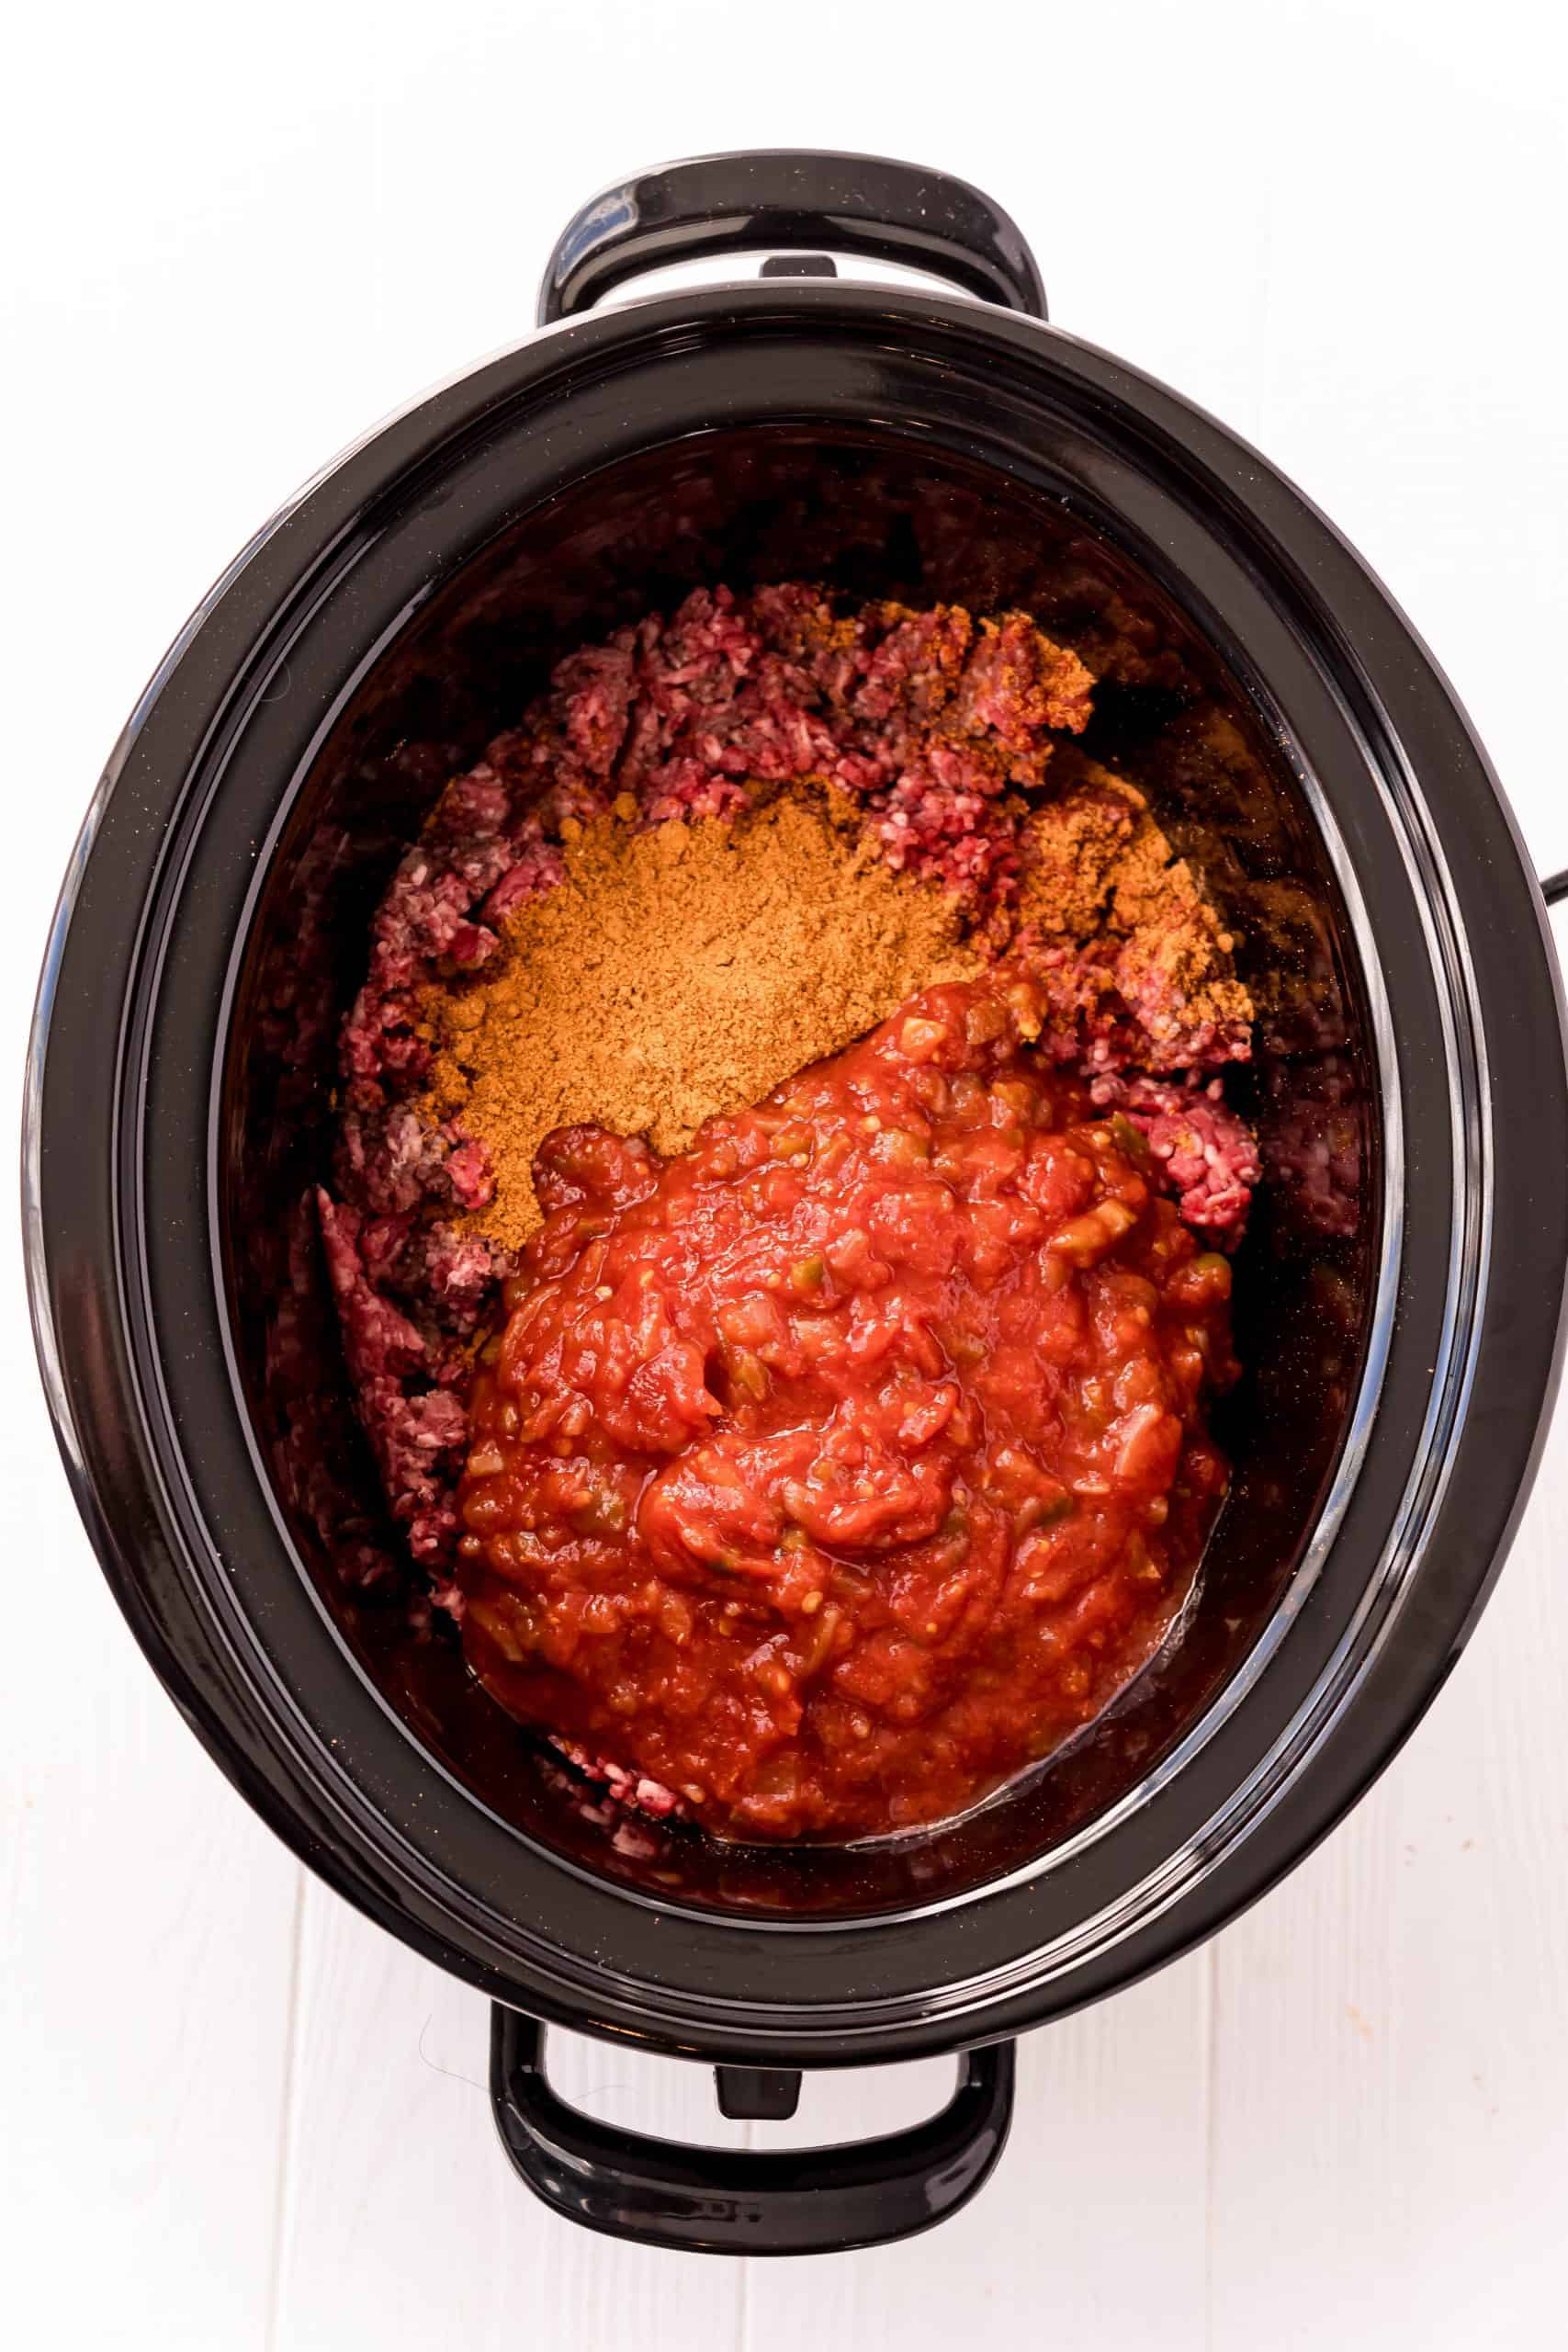 Salsa and taco seasoning added to black crock pot with ground beef